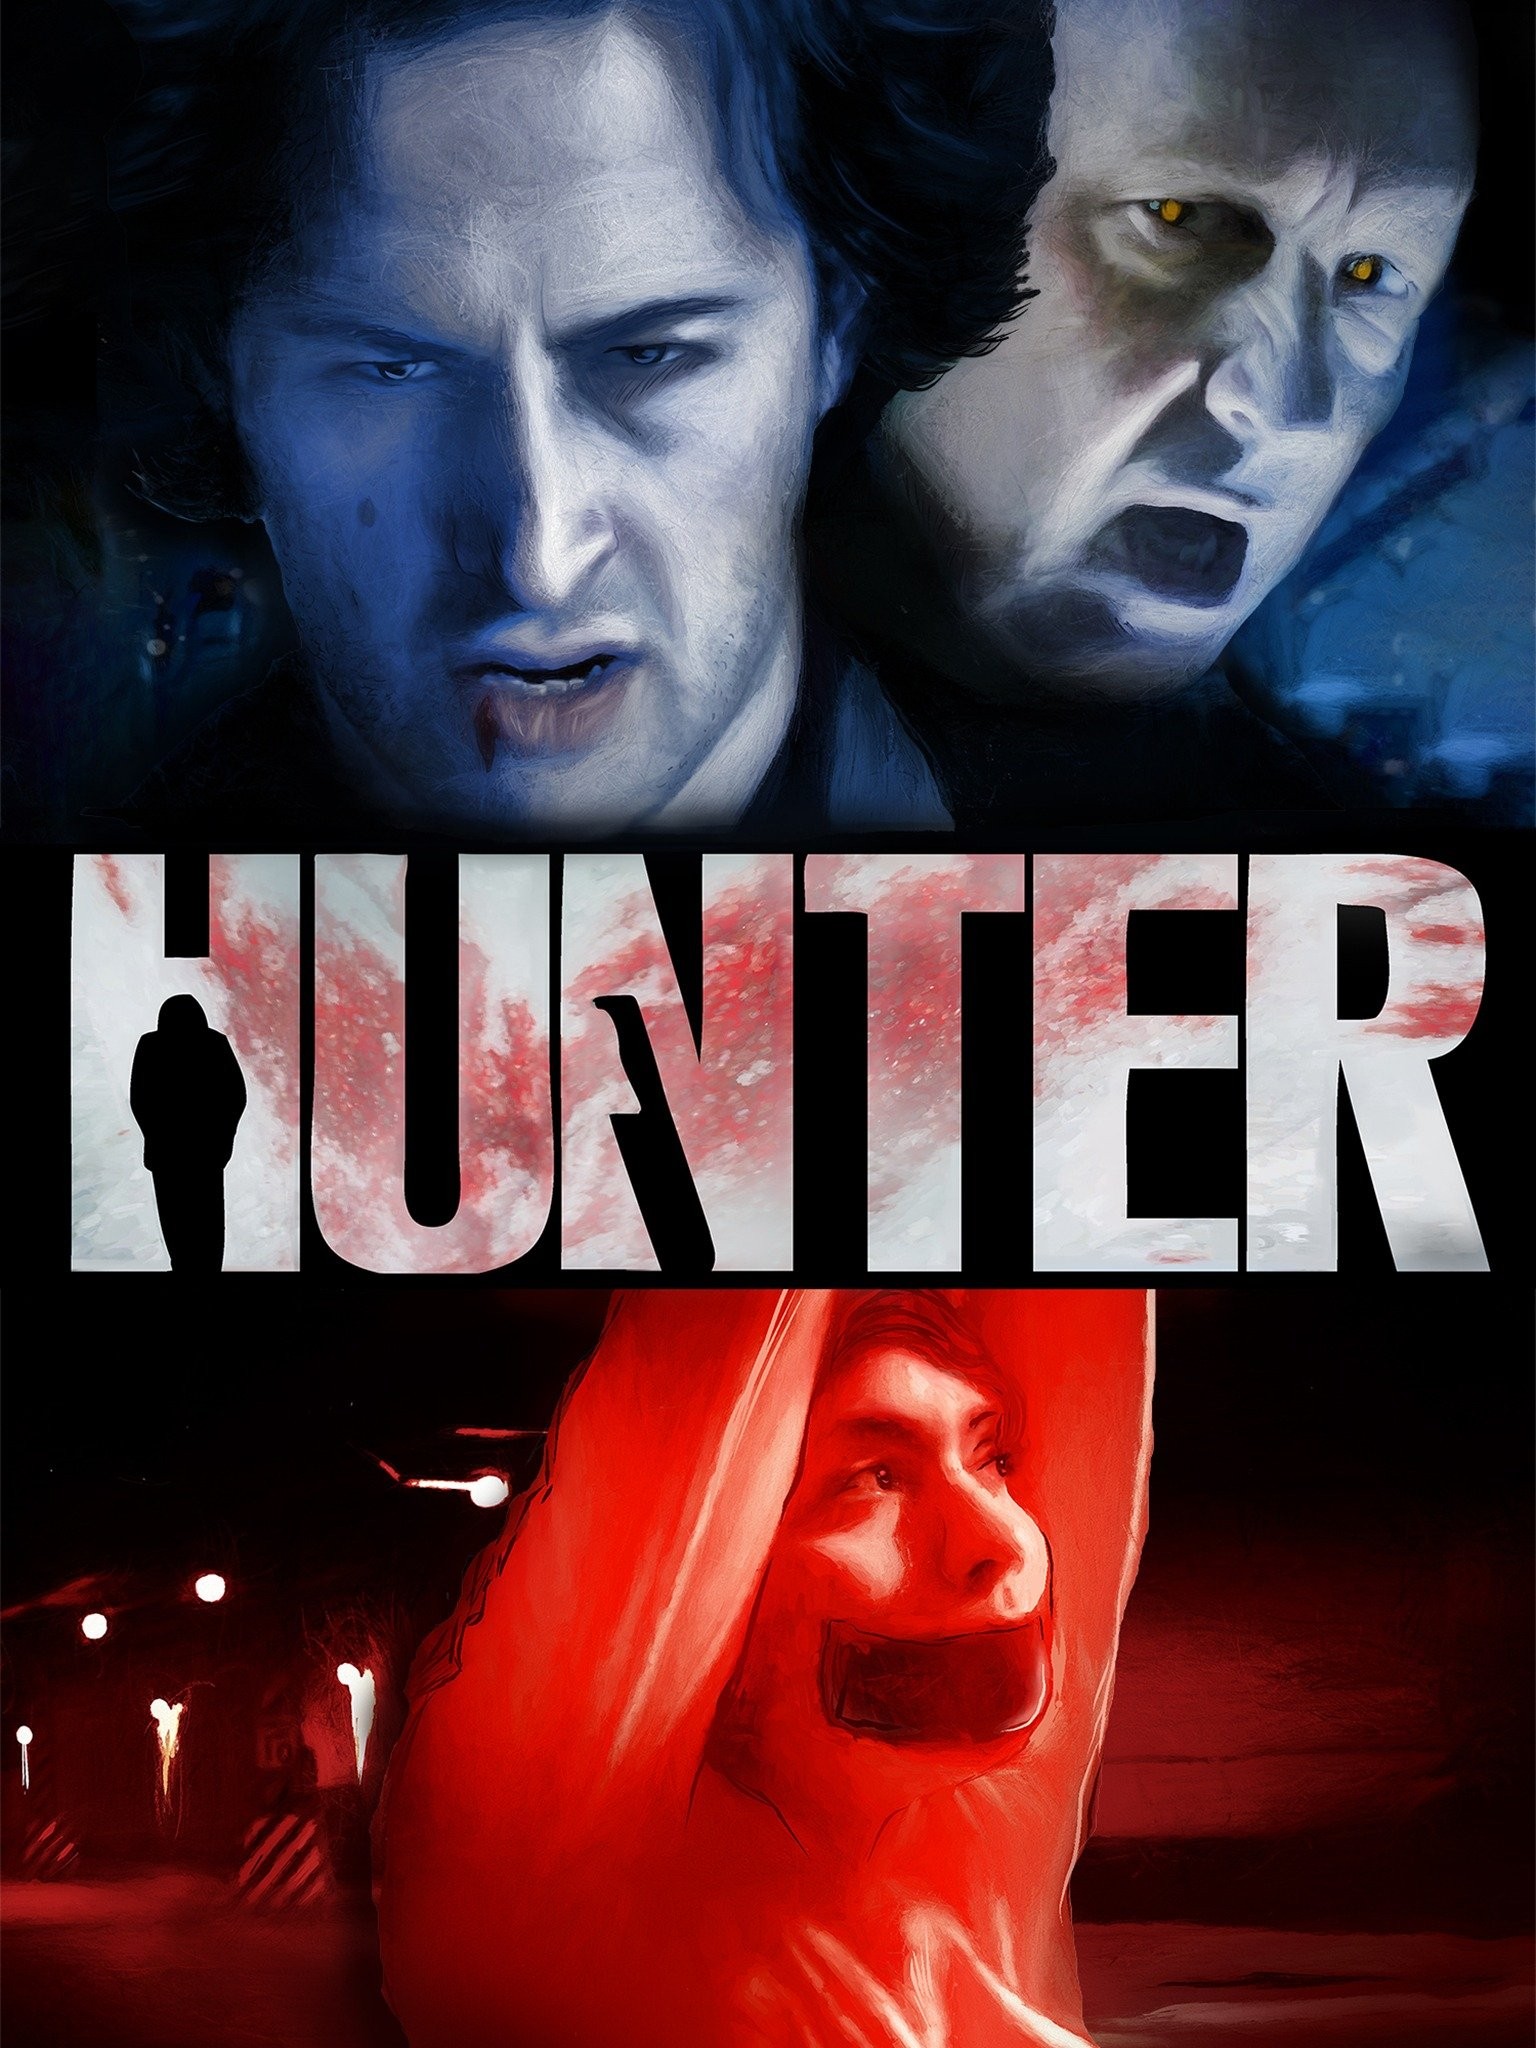 The Hunter - Rotten Tomatoes